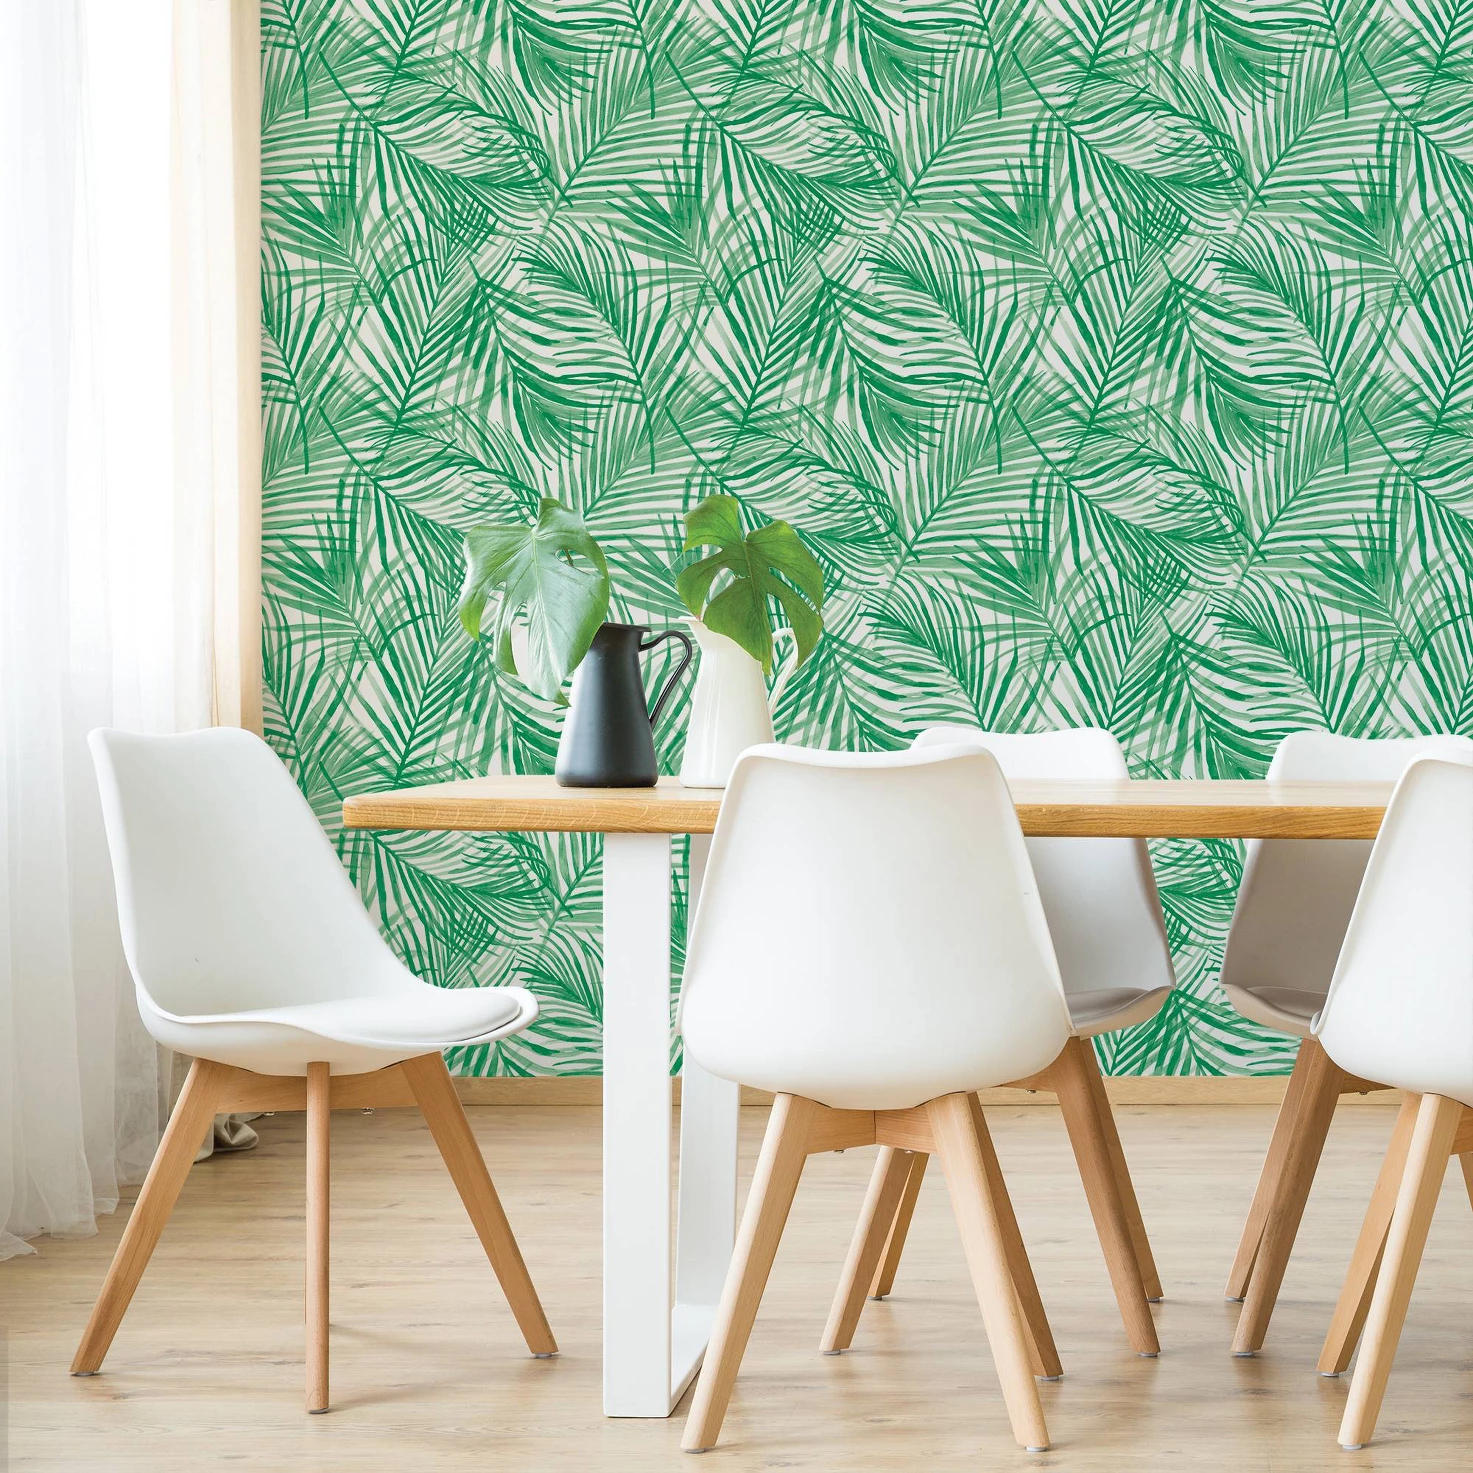 What You Need To Know About Peel And Stick Wallpaper  Hello home girl